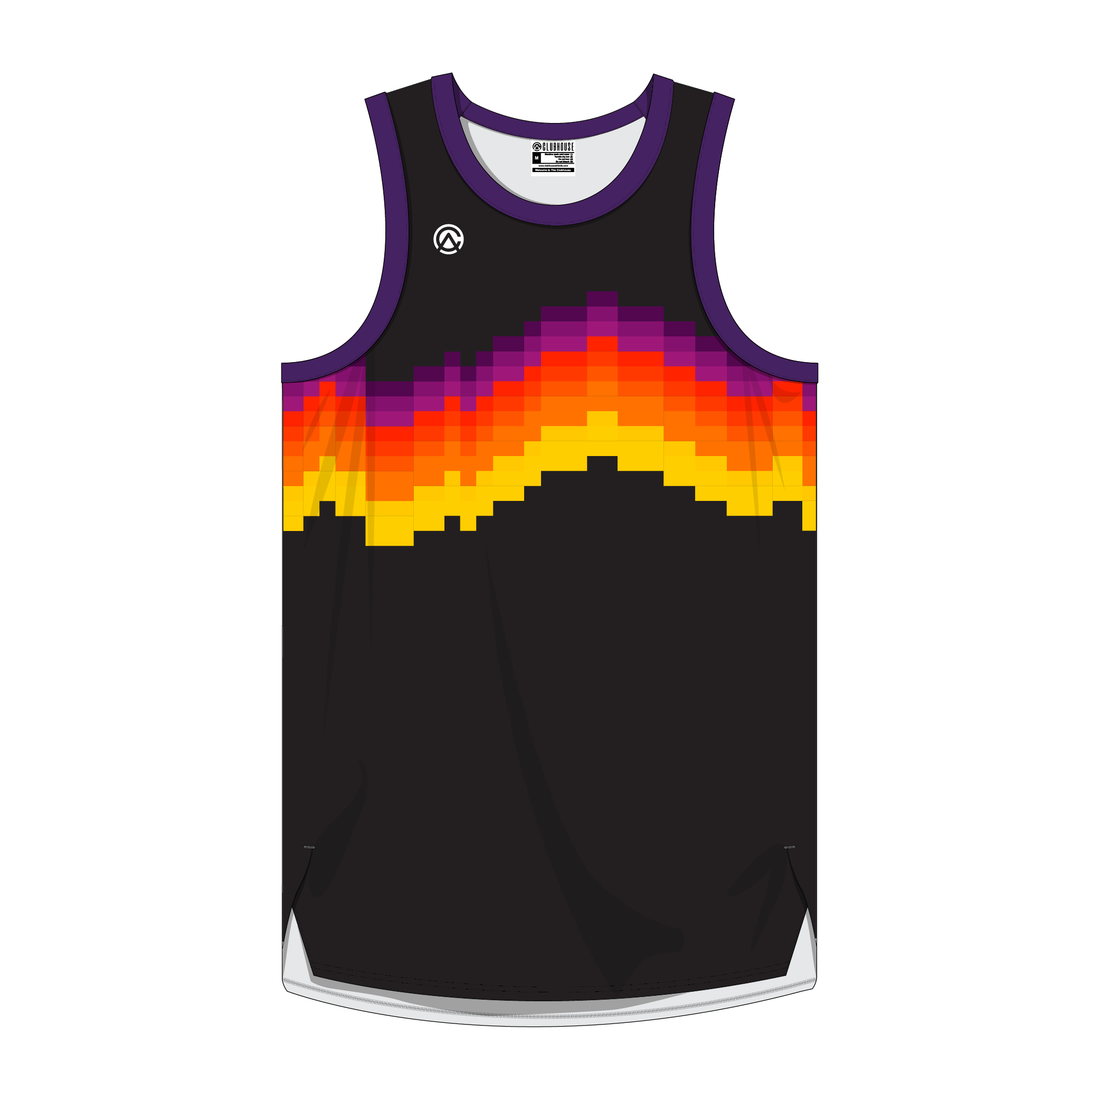 Clubhouse Original: The Valley Sunset Basketball Jersey